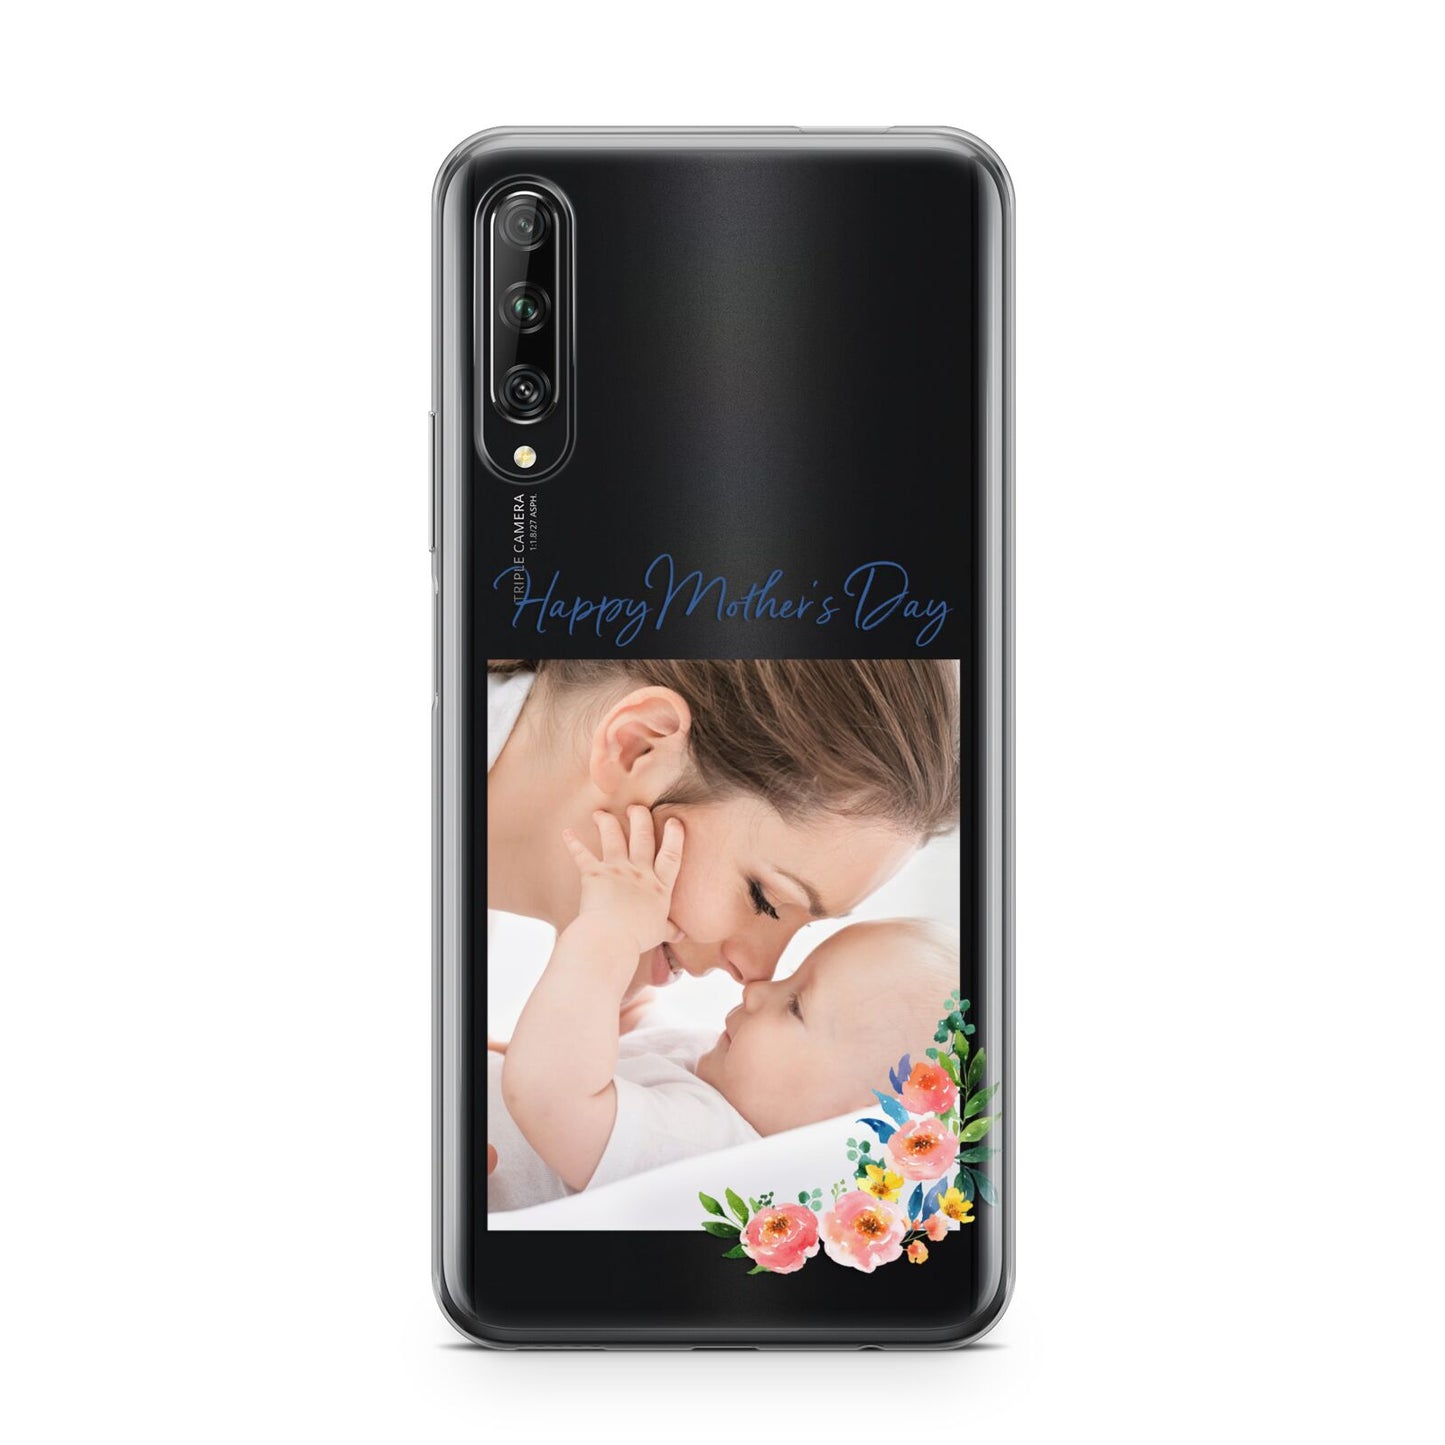 Classic Mothers Day Huawei P Smart Pro 2019